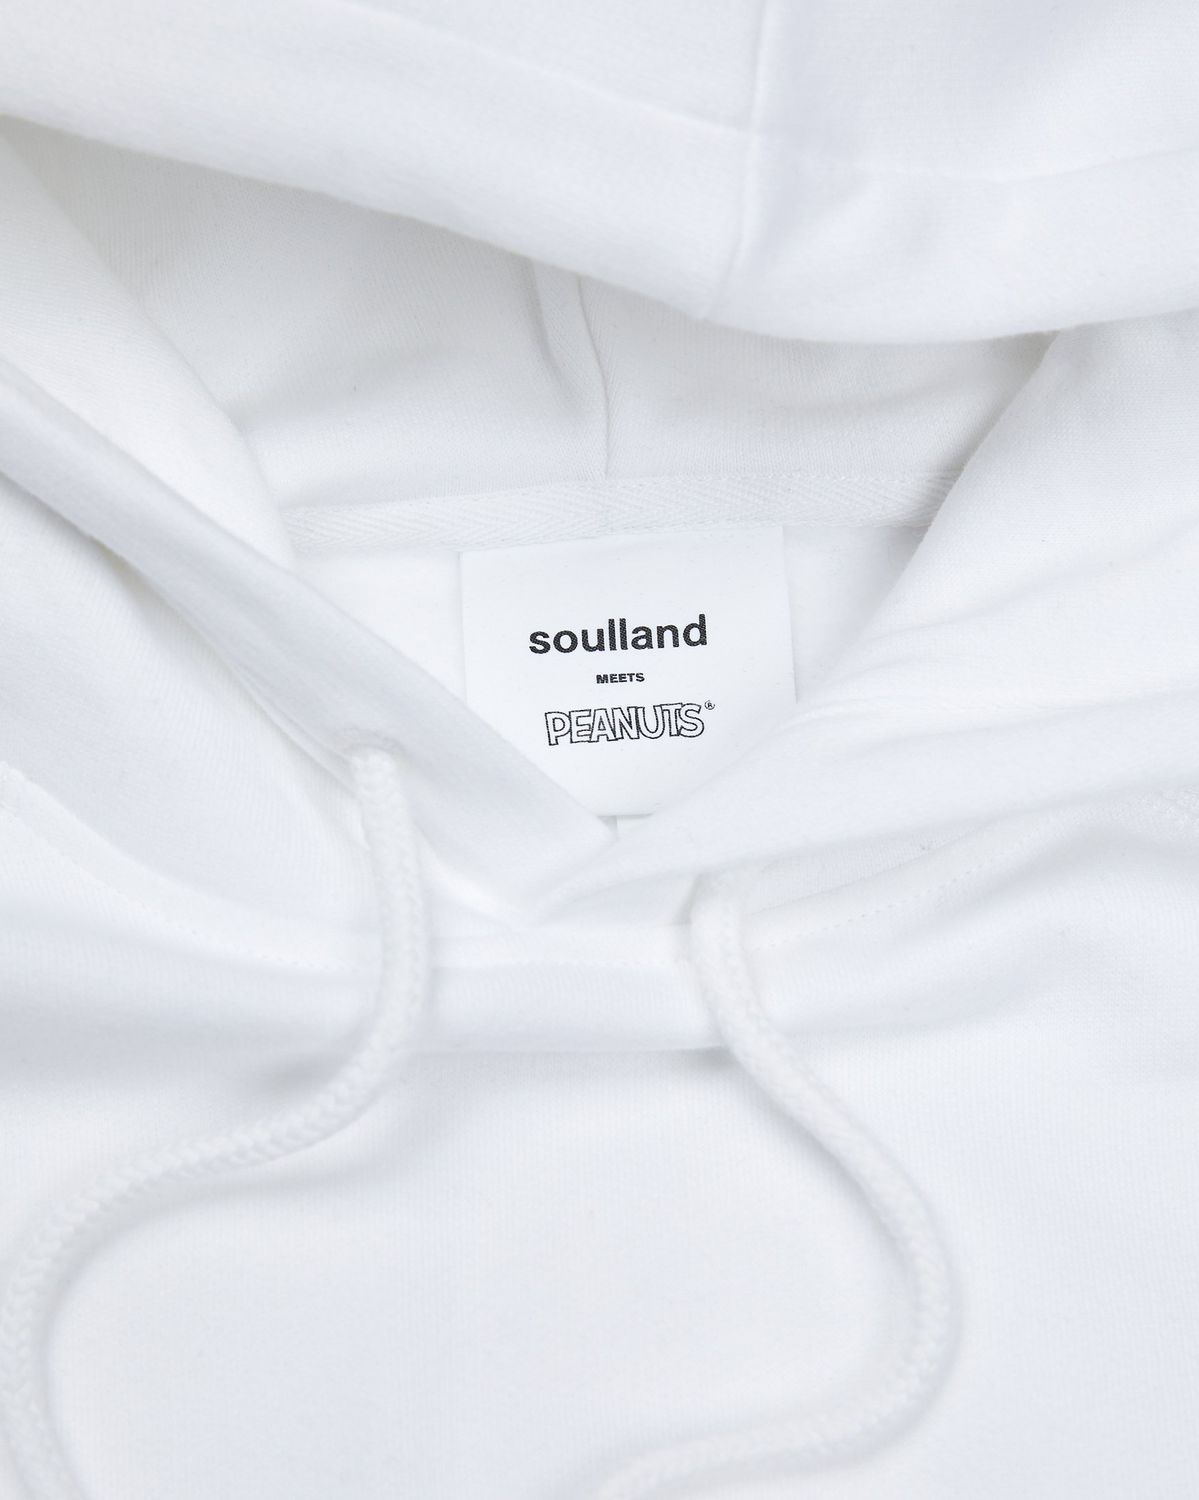 Colette Mon Amour x Soulland – Snoopy Bed White Hoodie - Sweats - White - Image 3